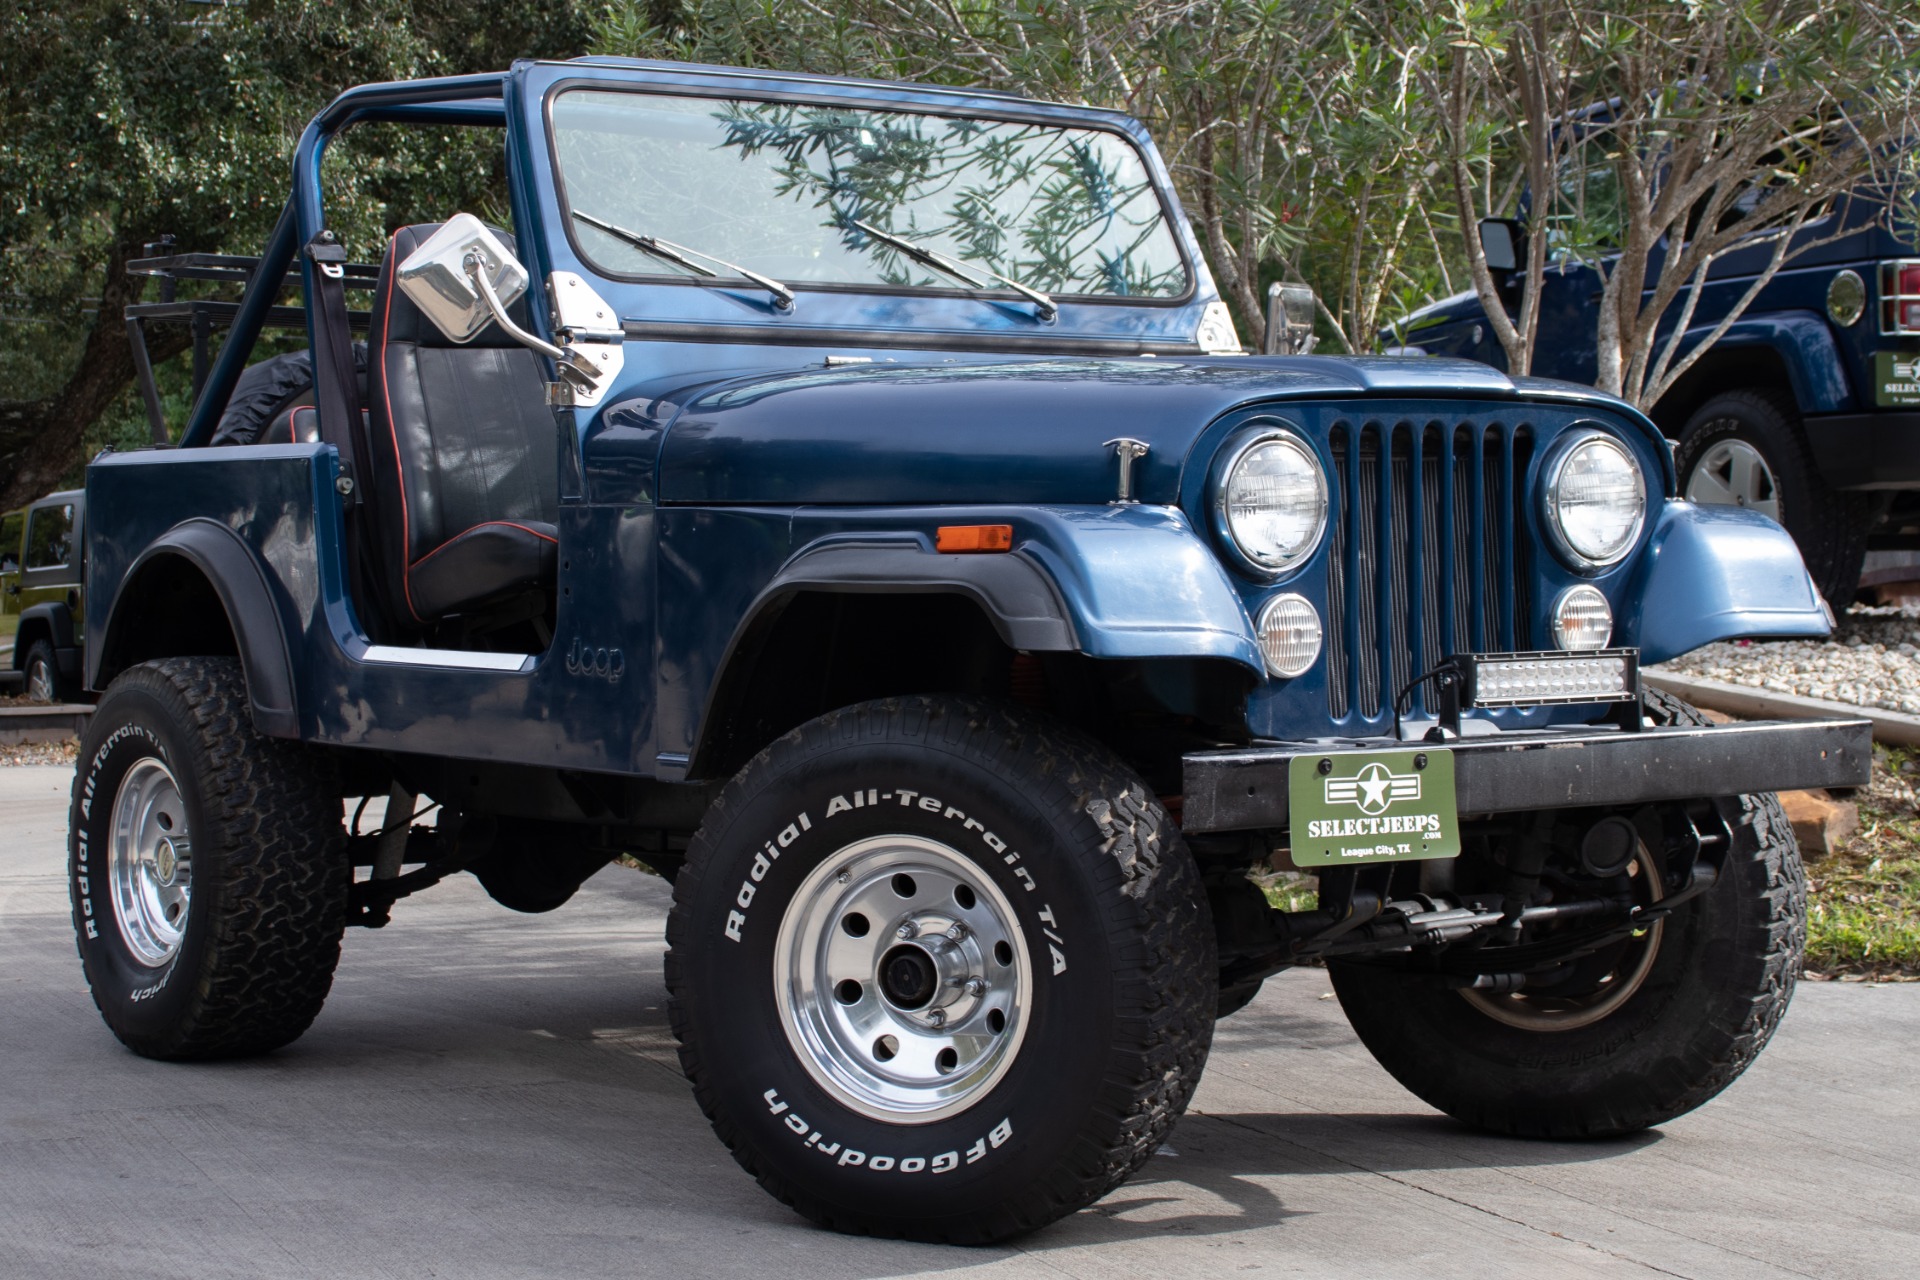 Used 1985 Jeep CJ-7 For Sale ($18,995) | Select Jeeps Inc. Stock #112209